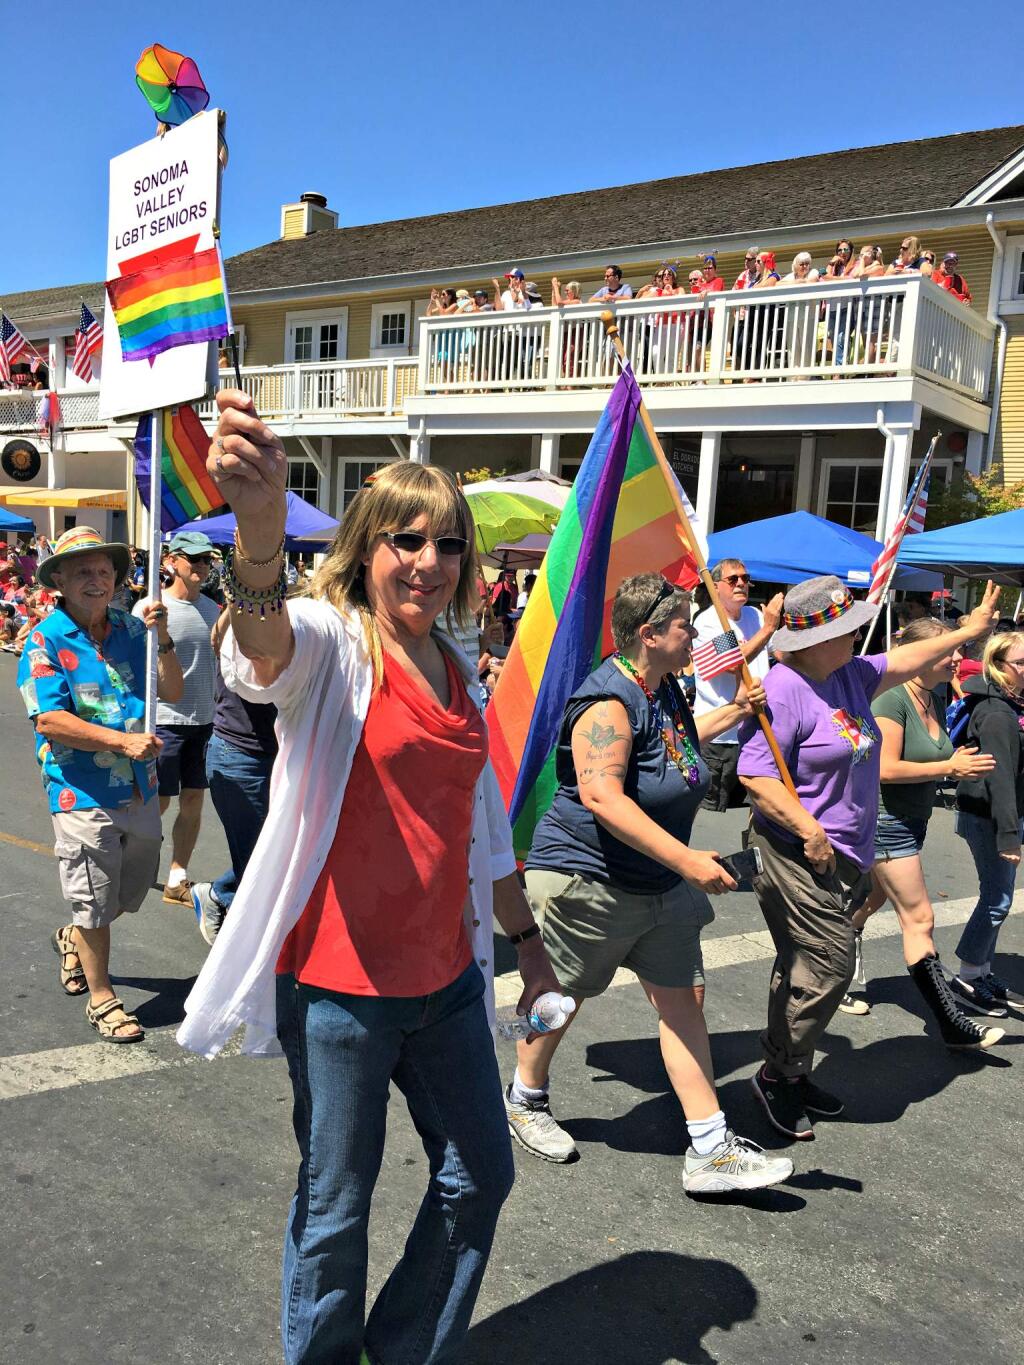 LGBT seniors marched in the 4th of July parade. The group meets regularly in Sonoma.